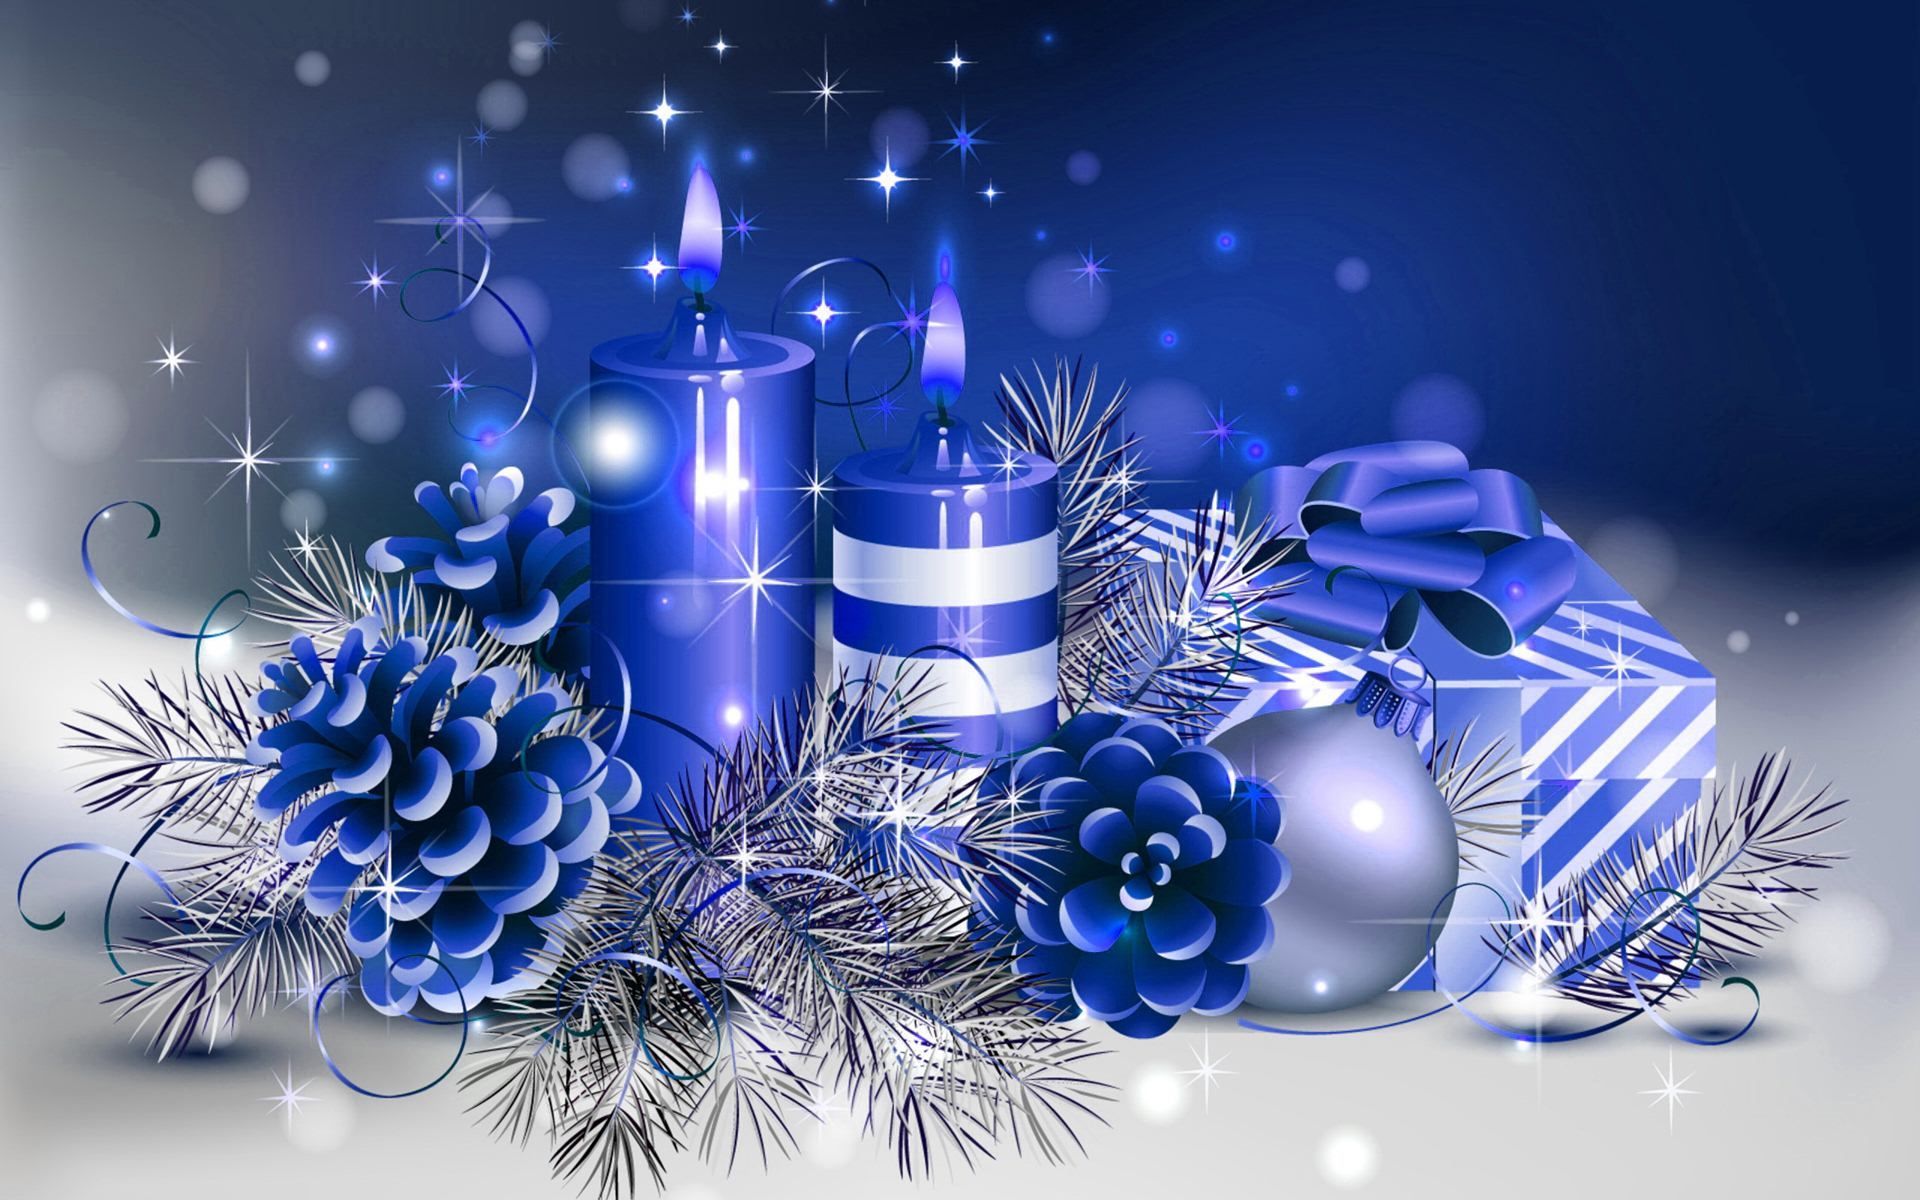 blue christmas candle image desktop, Christmas wallpaper free, Winter holiday decorations